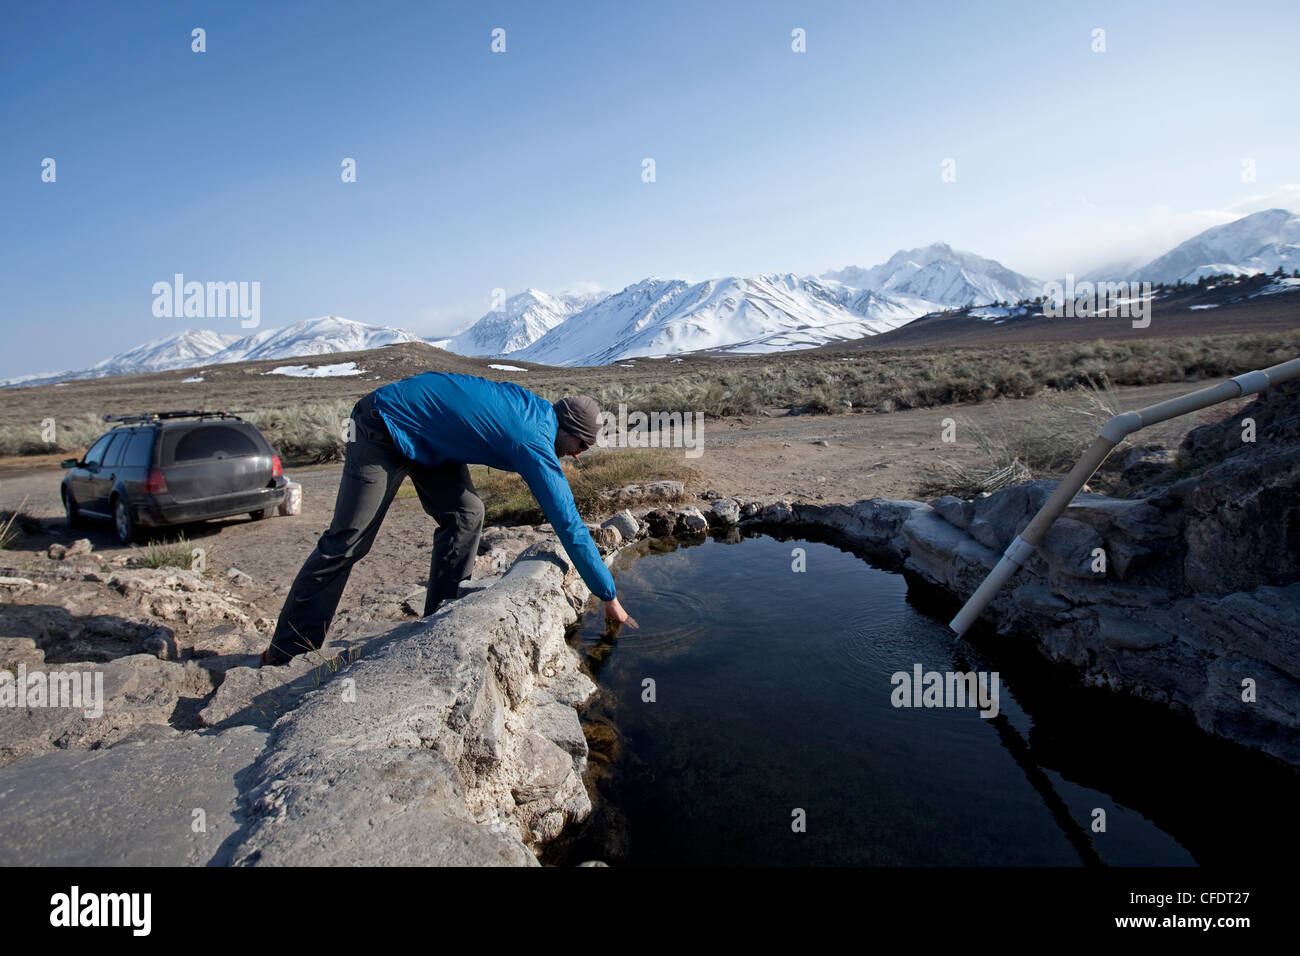 A man hot springing near the mountains. Stock Photo